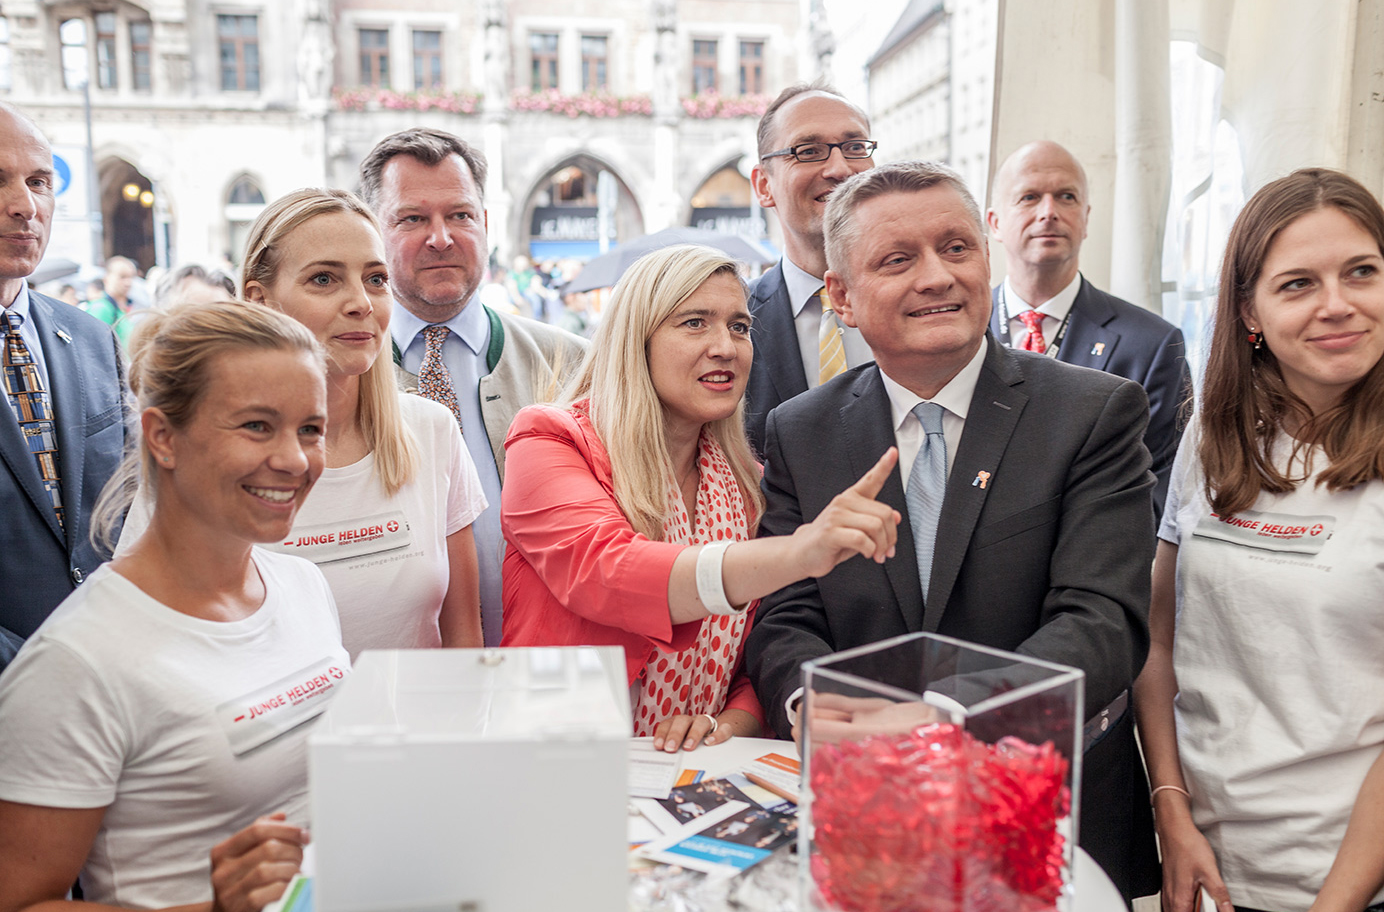 Bavaria’s Minister of Health Melanie Huml (center) and German Federal Minister of Health Hermann Gröhe at the information desk of the Young Heroes (Photo)